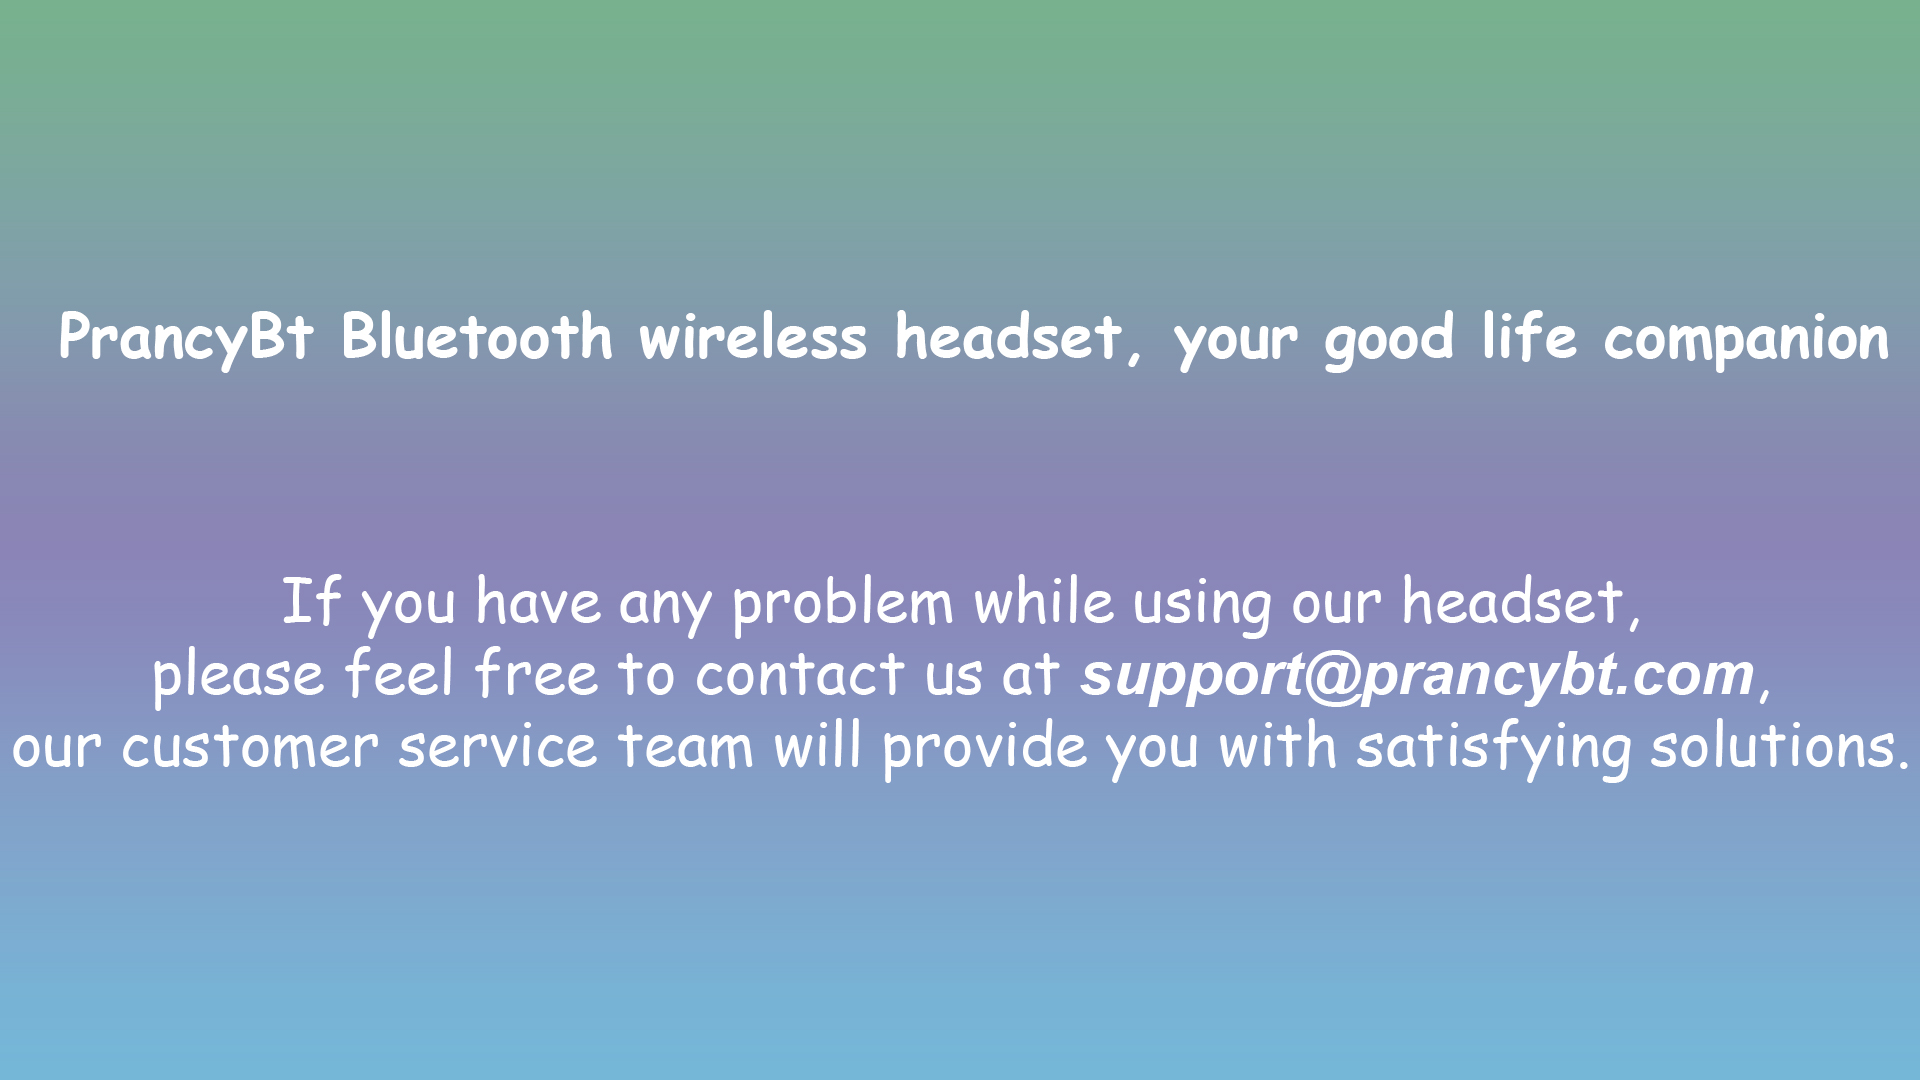 PrancyBt Trucker Bluetooth Headset, Wireless Headset with Microphone for PC, Bluetooth Headset with Microphone Noise Cancelling, Mute Button, 55H Talk Time, for Cell Phones, Computer, Truck Drivers